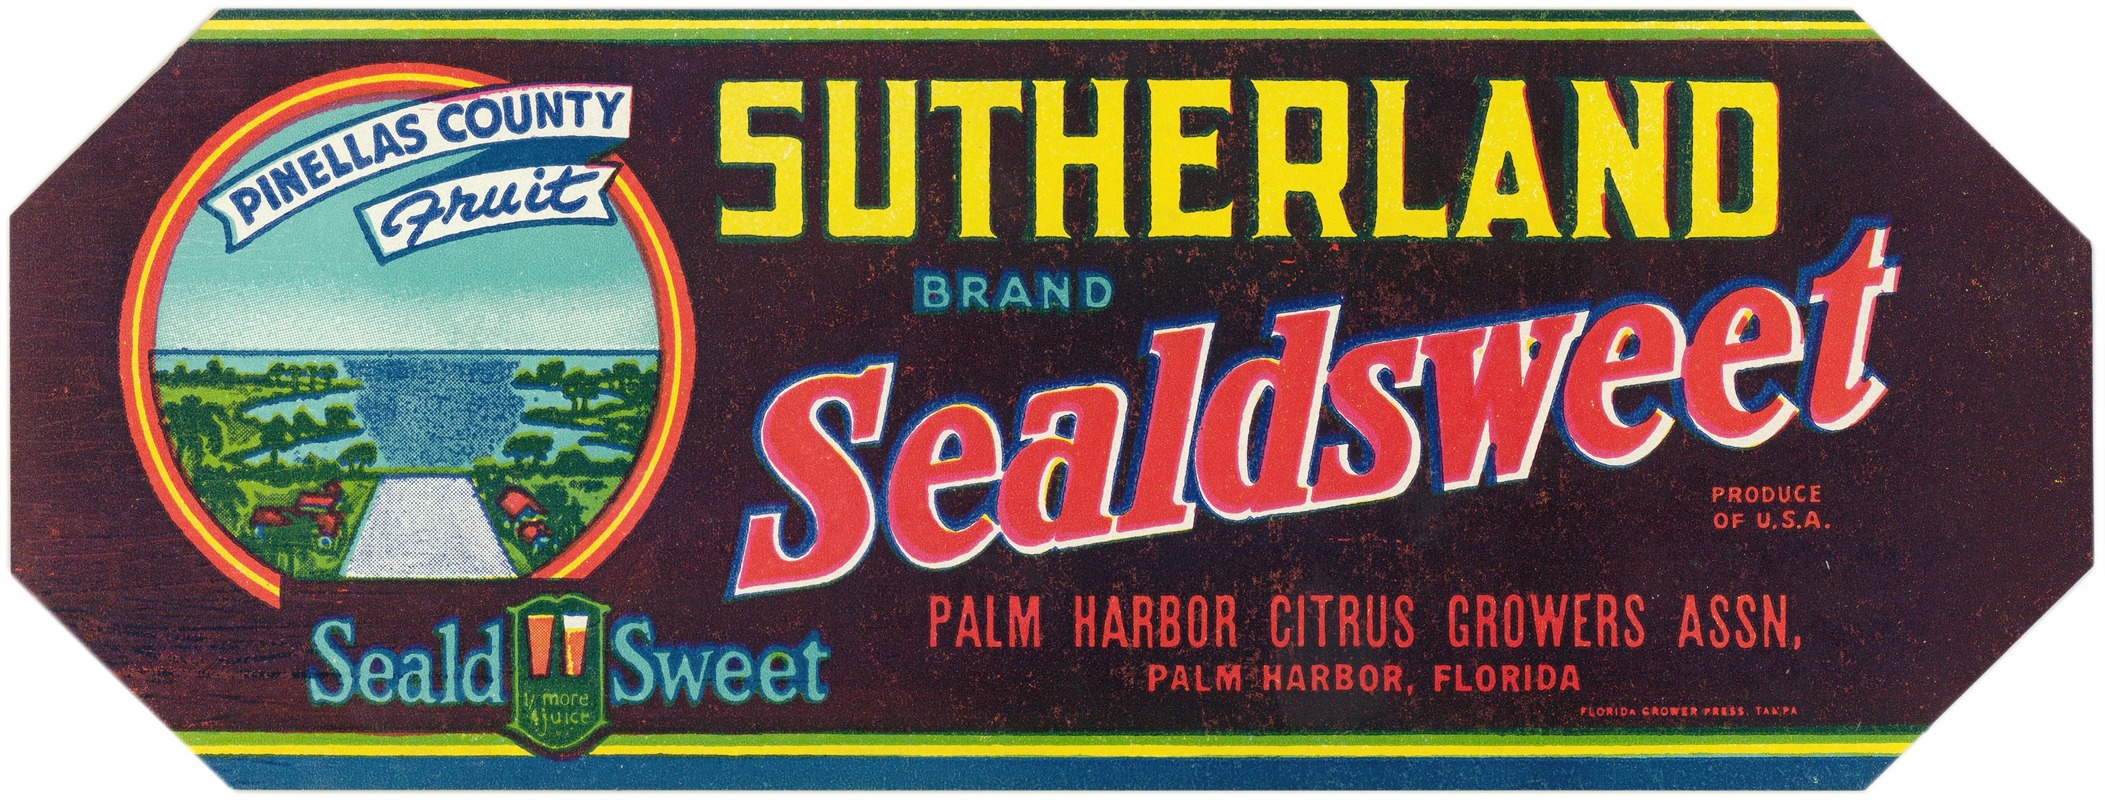 Anonymous - Sutherland Brand Fruit Label